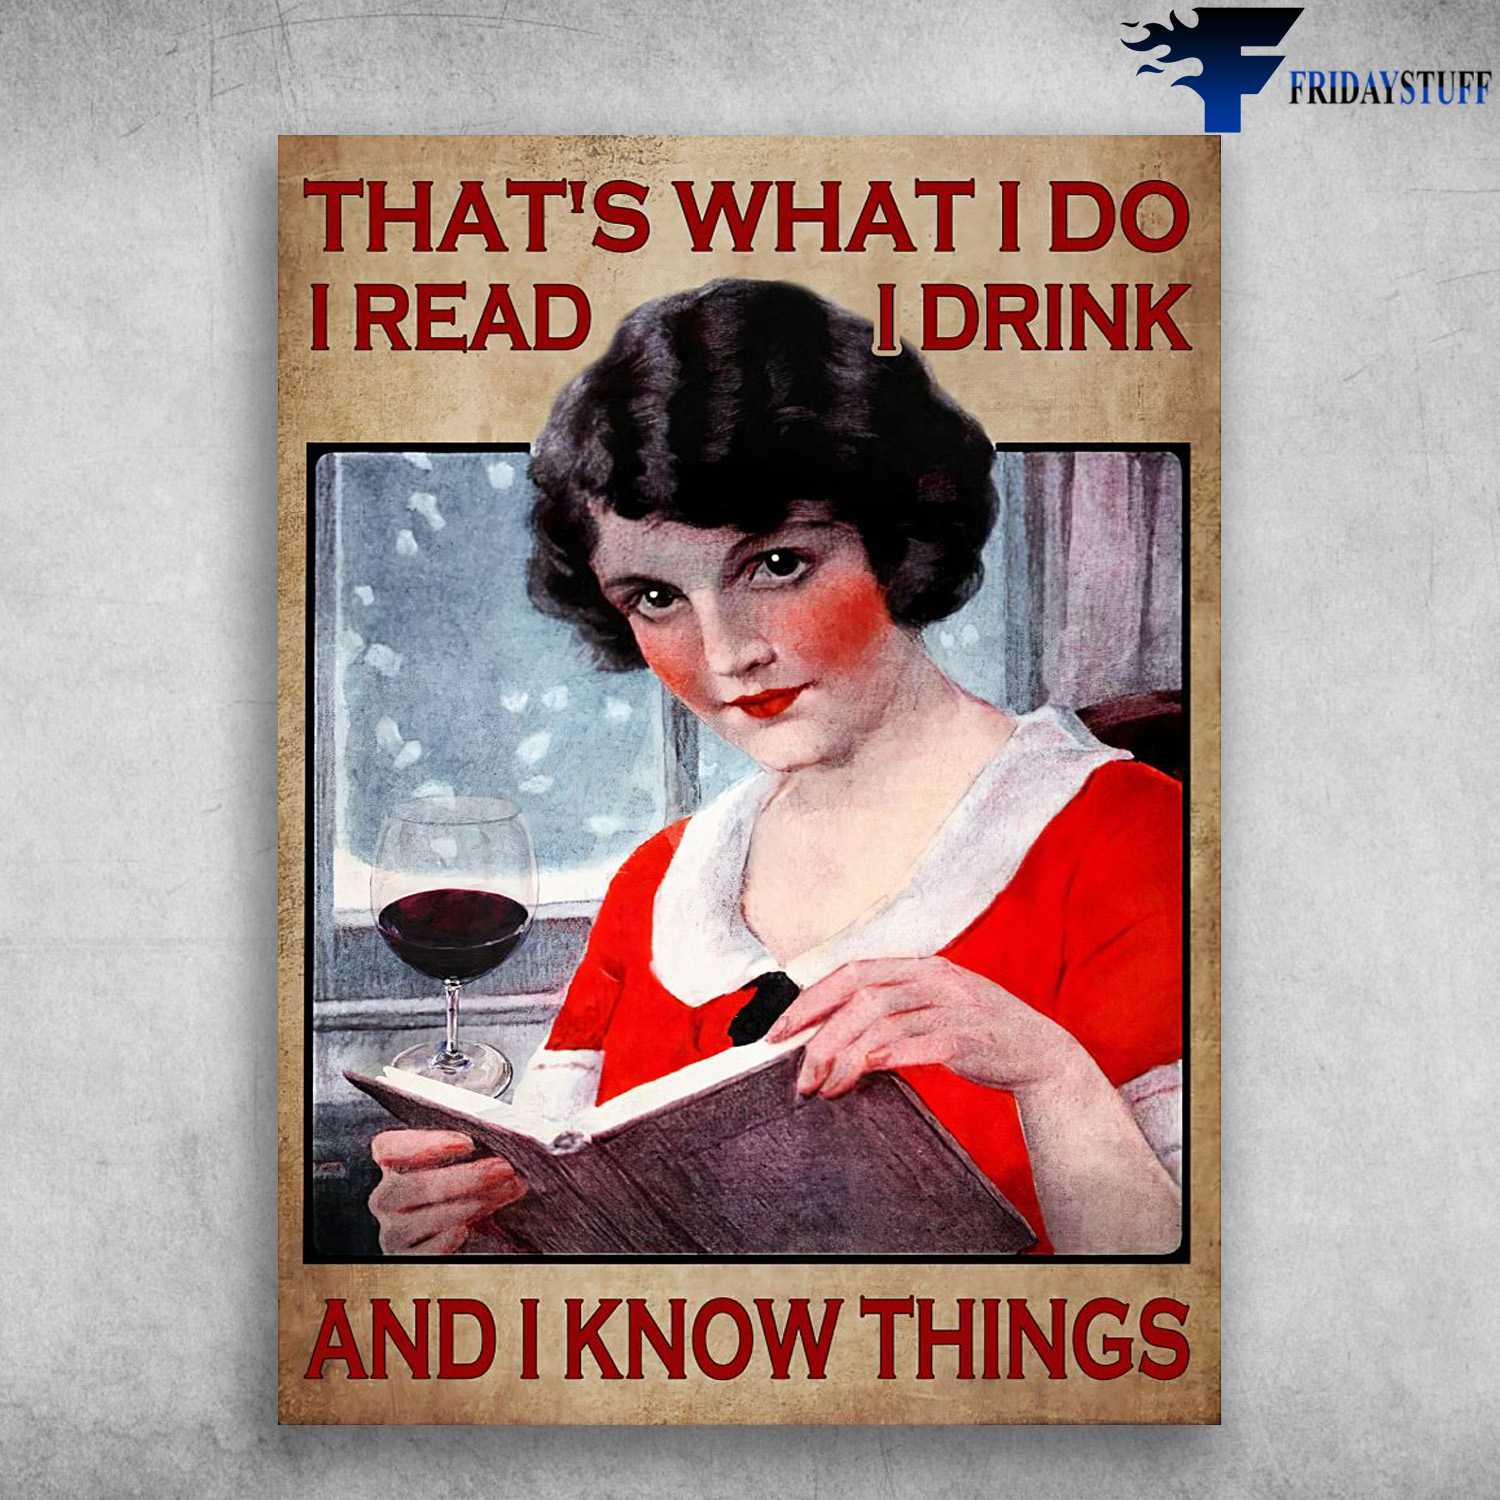 Book And Wine, Lady Reading - That's What I Do, I Read, I Drink, And I Know Things